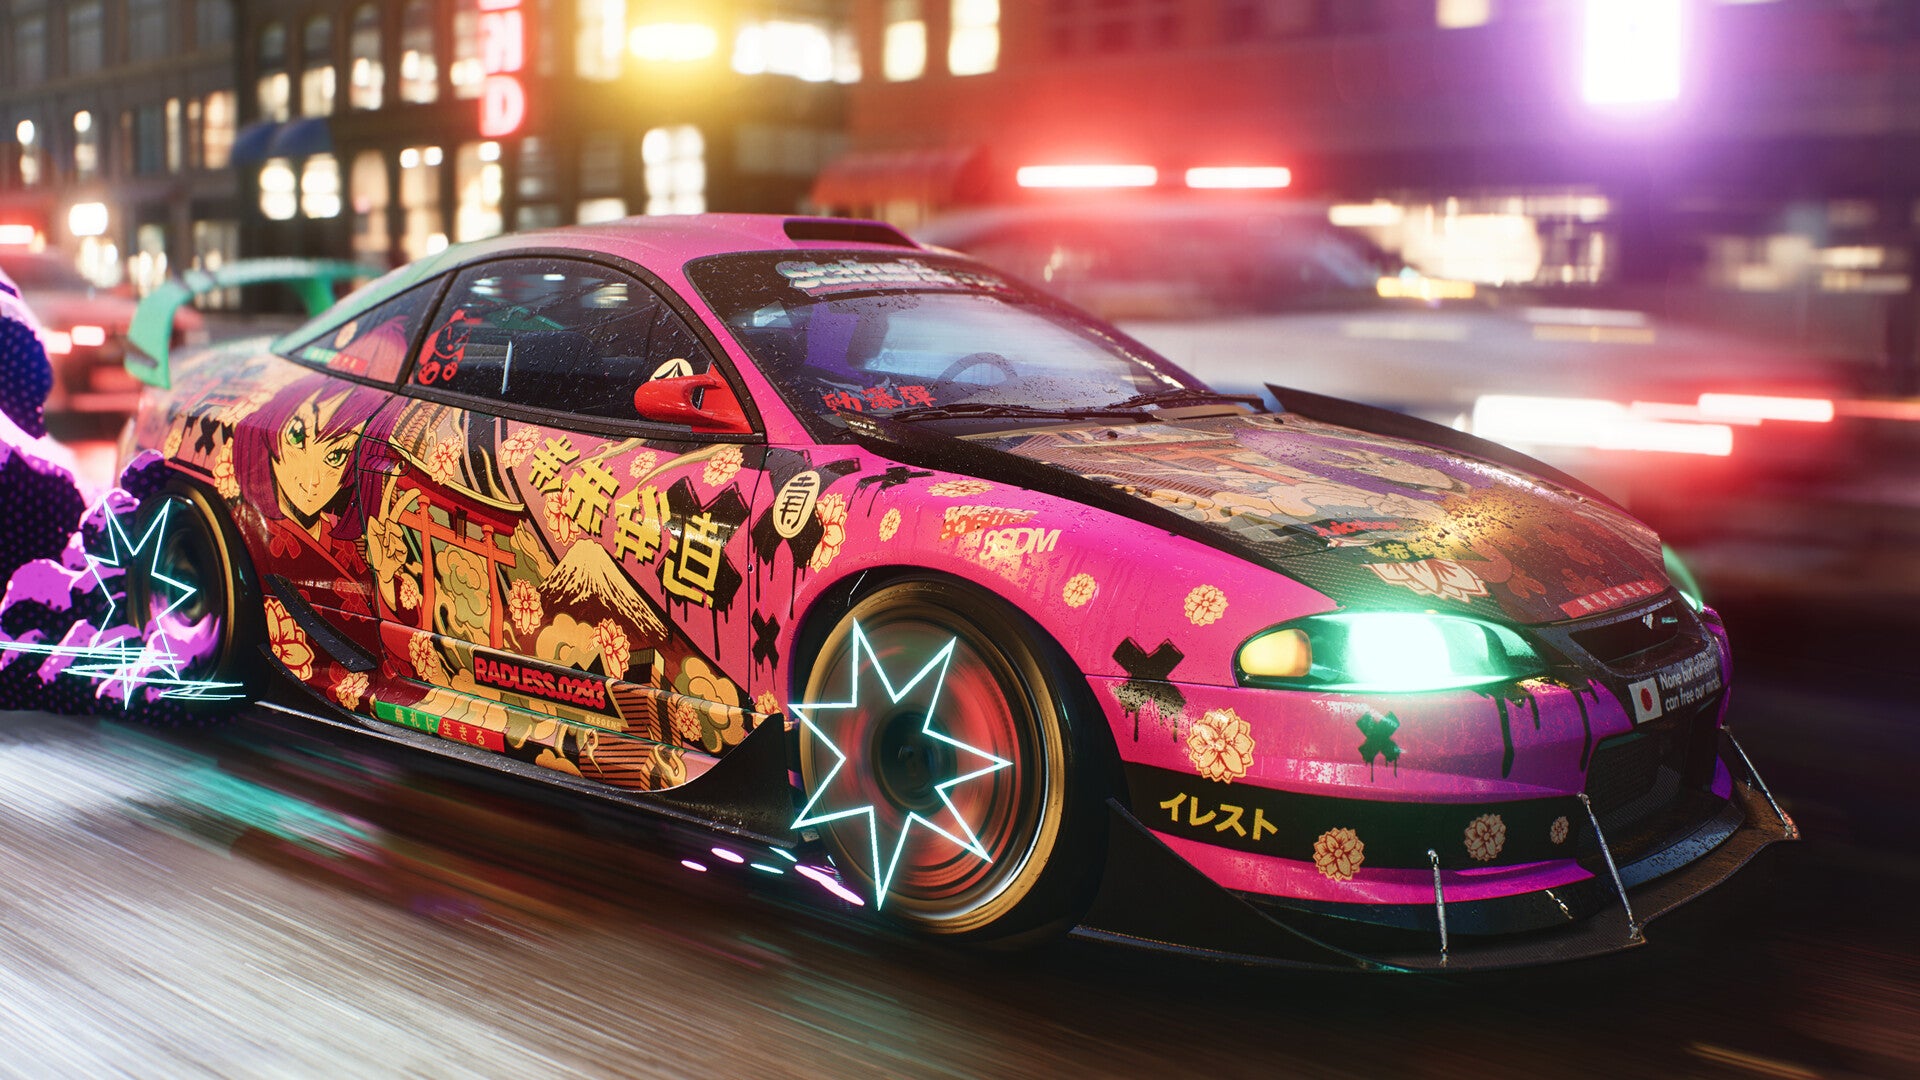 Image for Need for Speed Unbound gameplay leaks online days ahead of its official release date